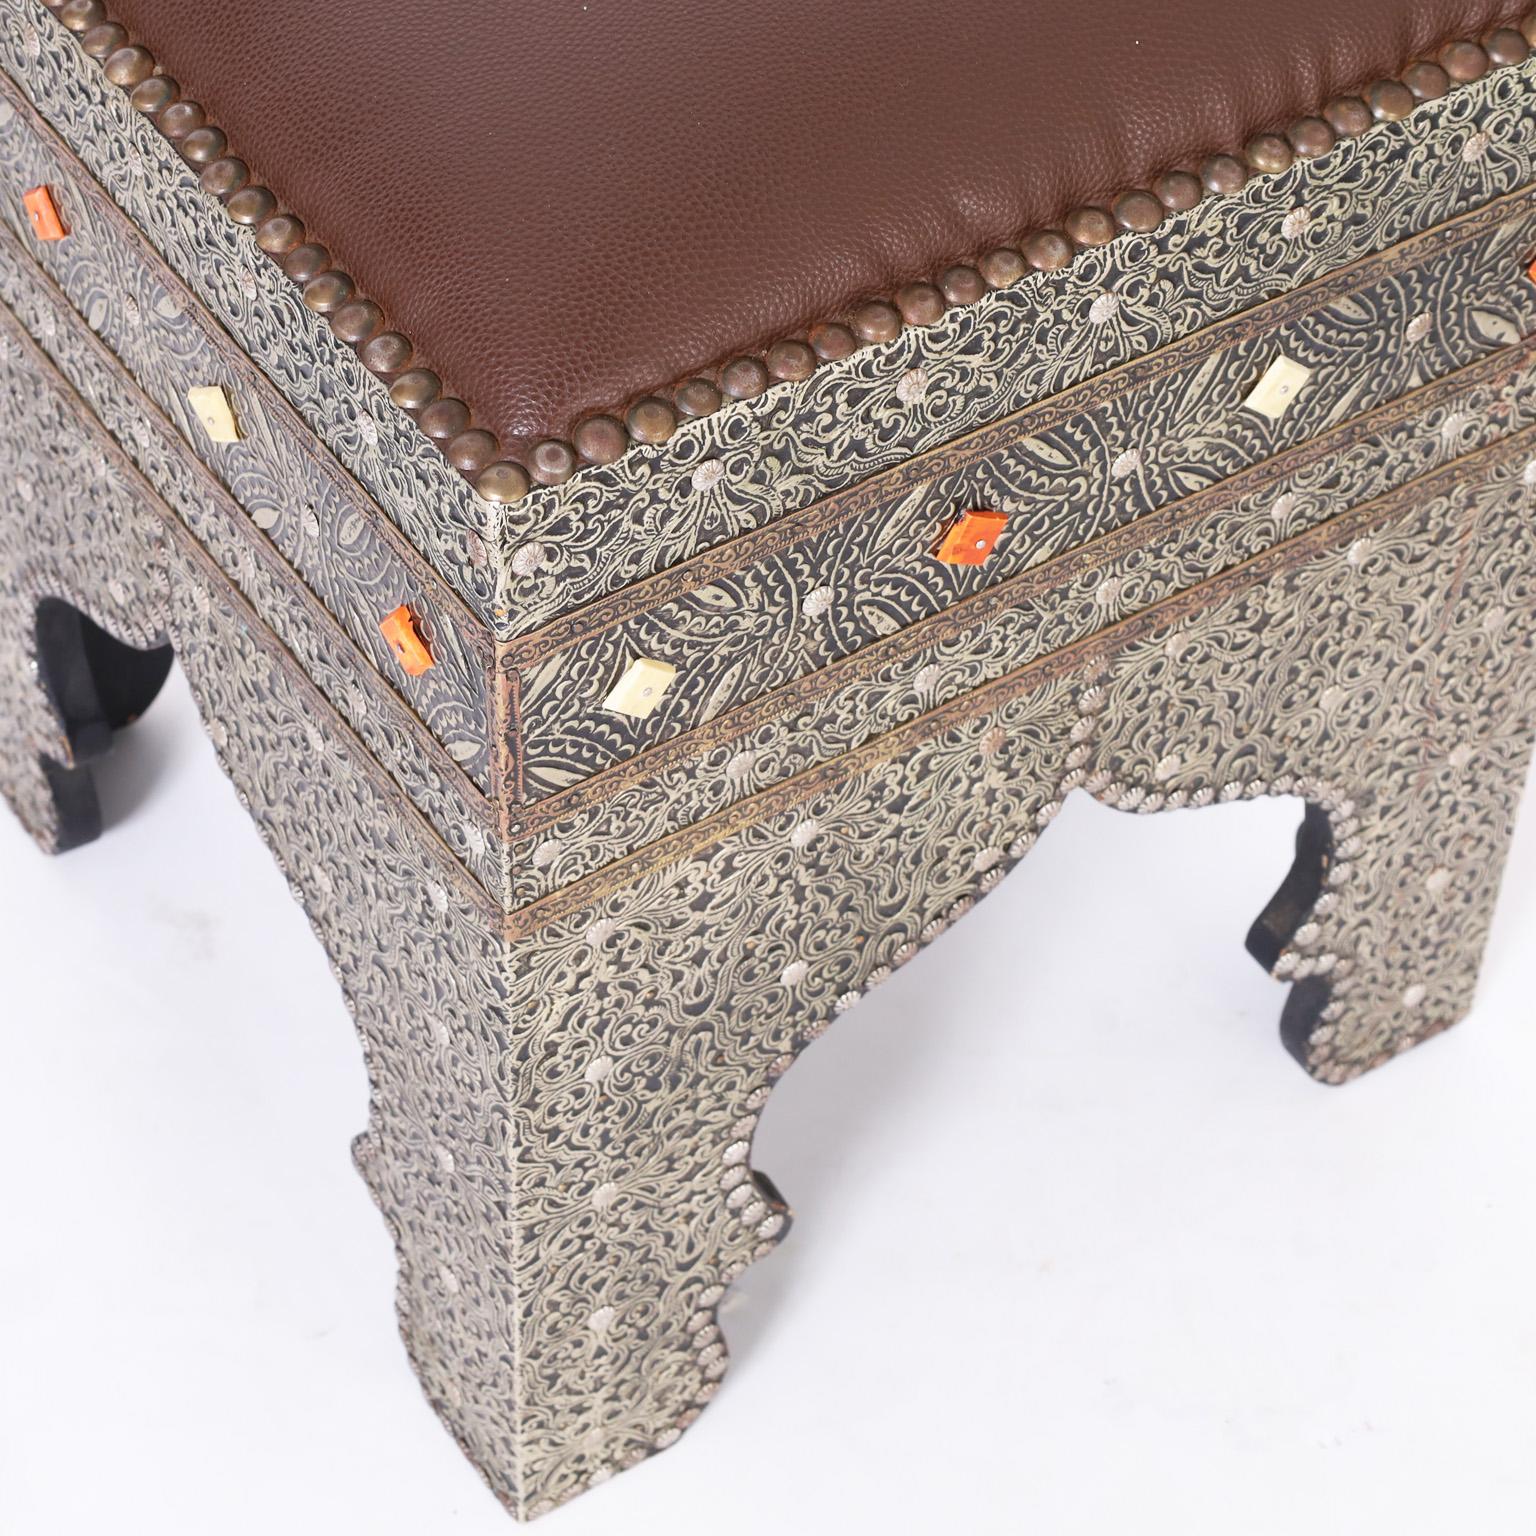 Pair of Vintage Turkish Metal Work Ottomans or Footstools In Good Condition For Sale In Palm Beach, FL